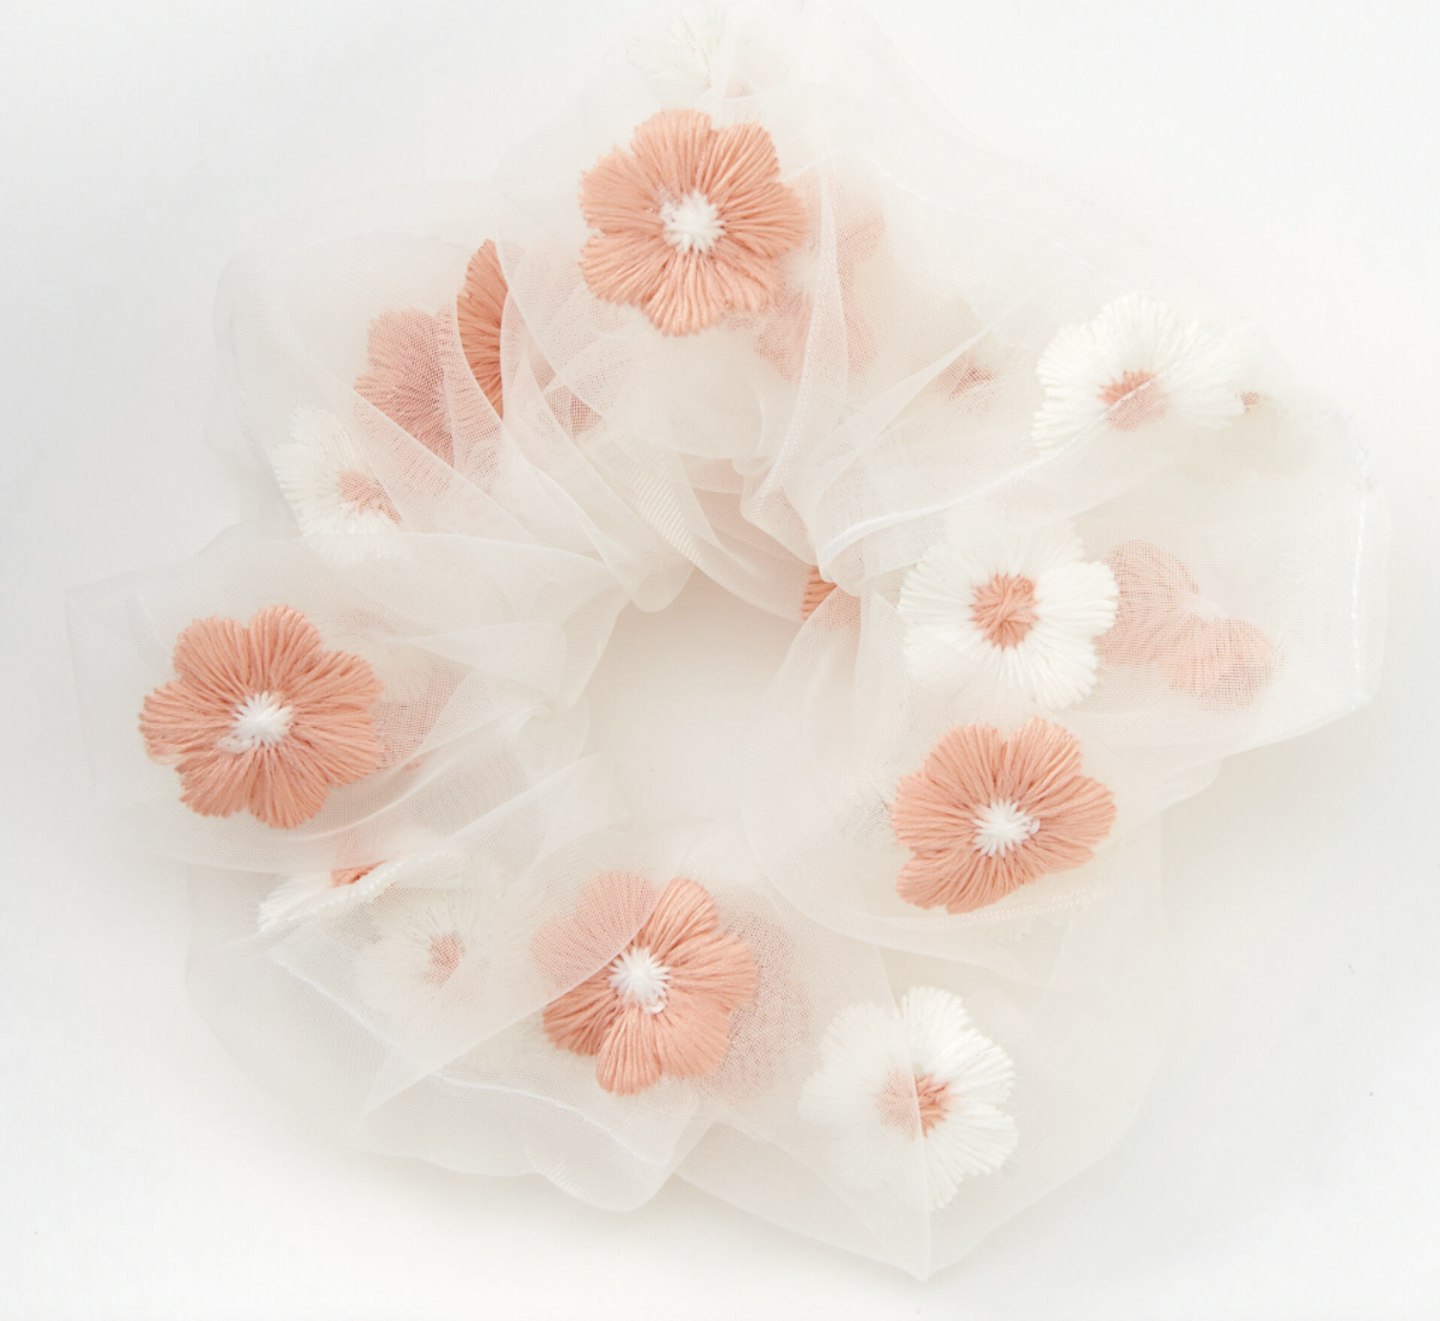 Claire's Giant Sheer Mesh Daisy Scrunchie, £2.75